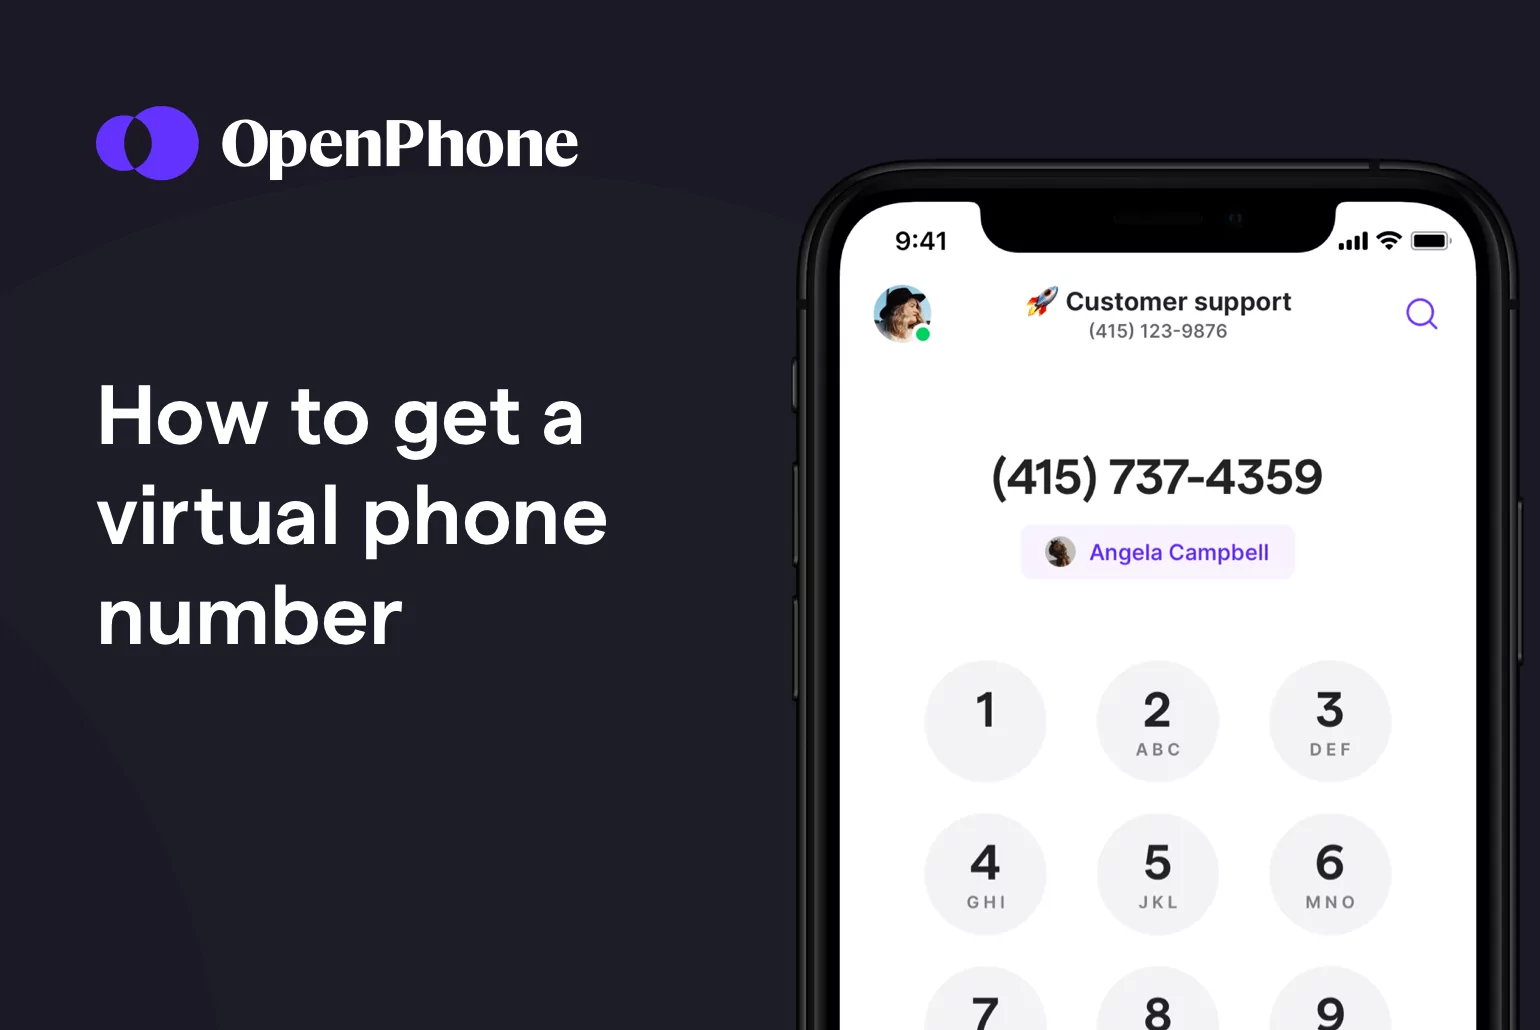 How to get a virtual phone number